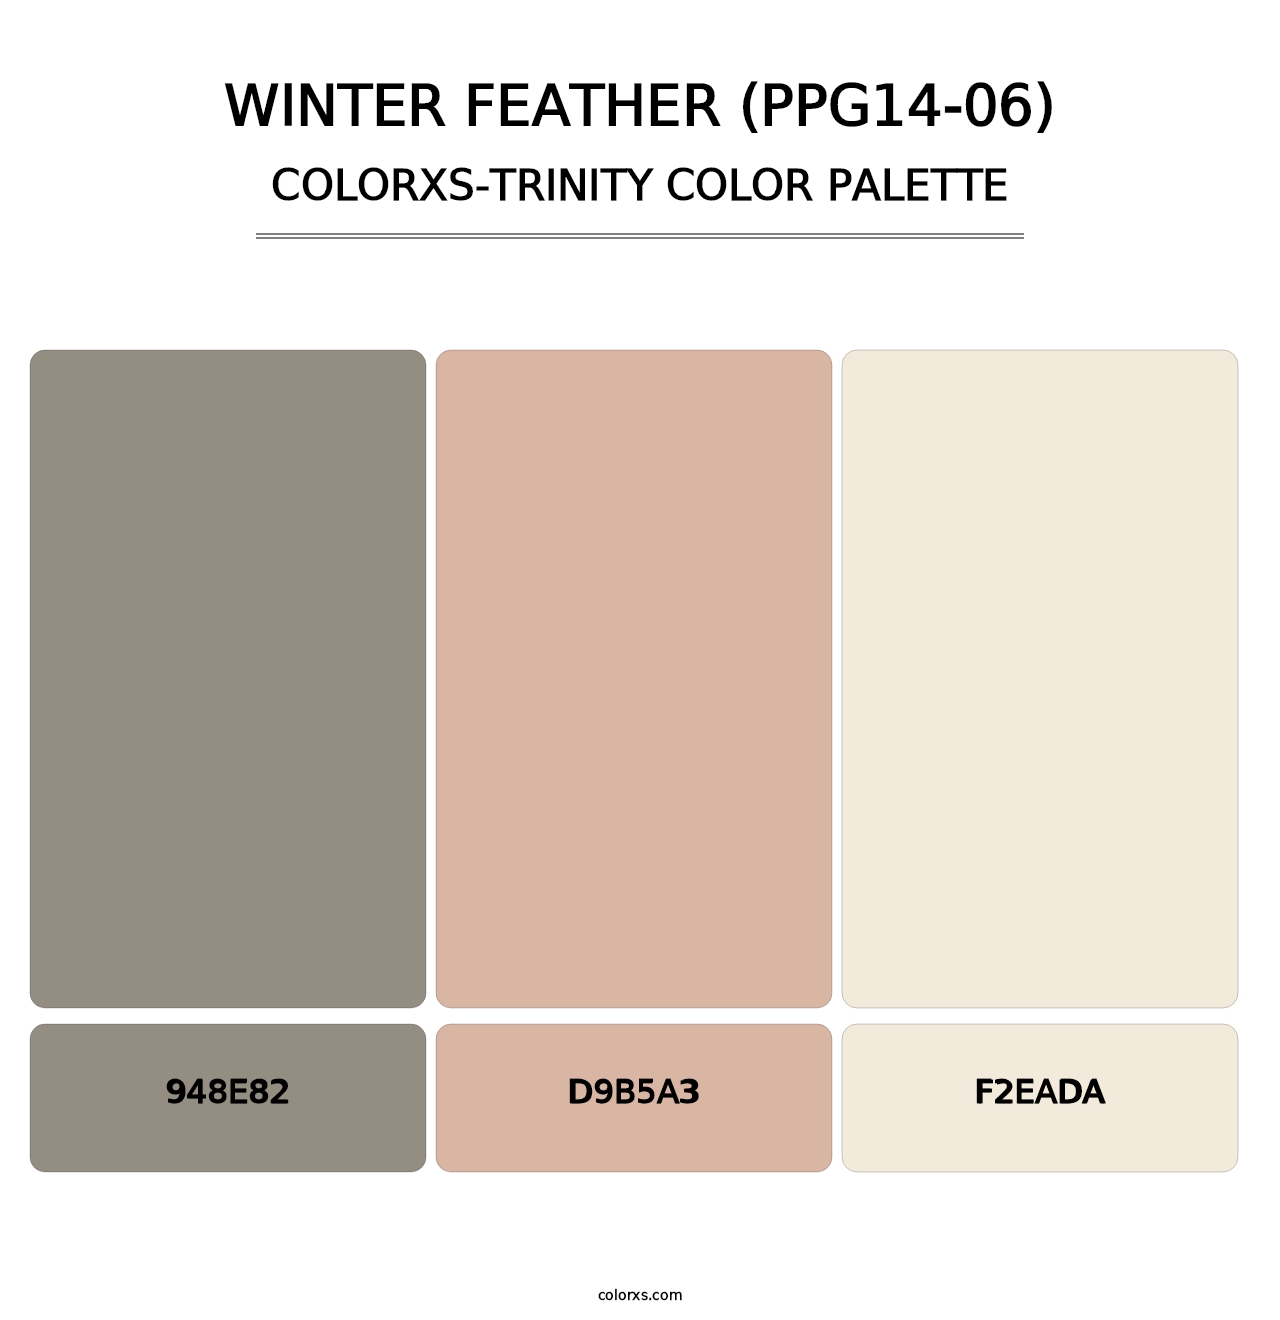 Winter Feather (PPG14-06) - Colorxs Trinity Palette